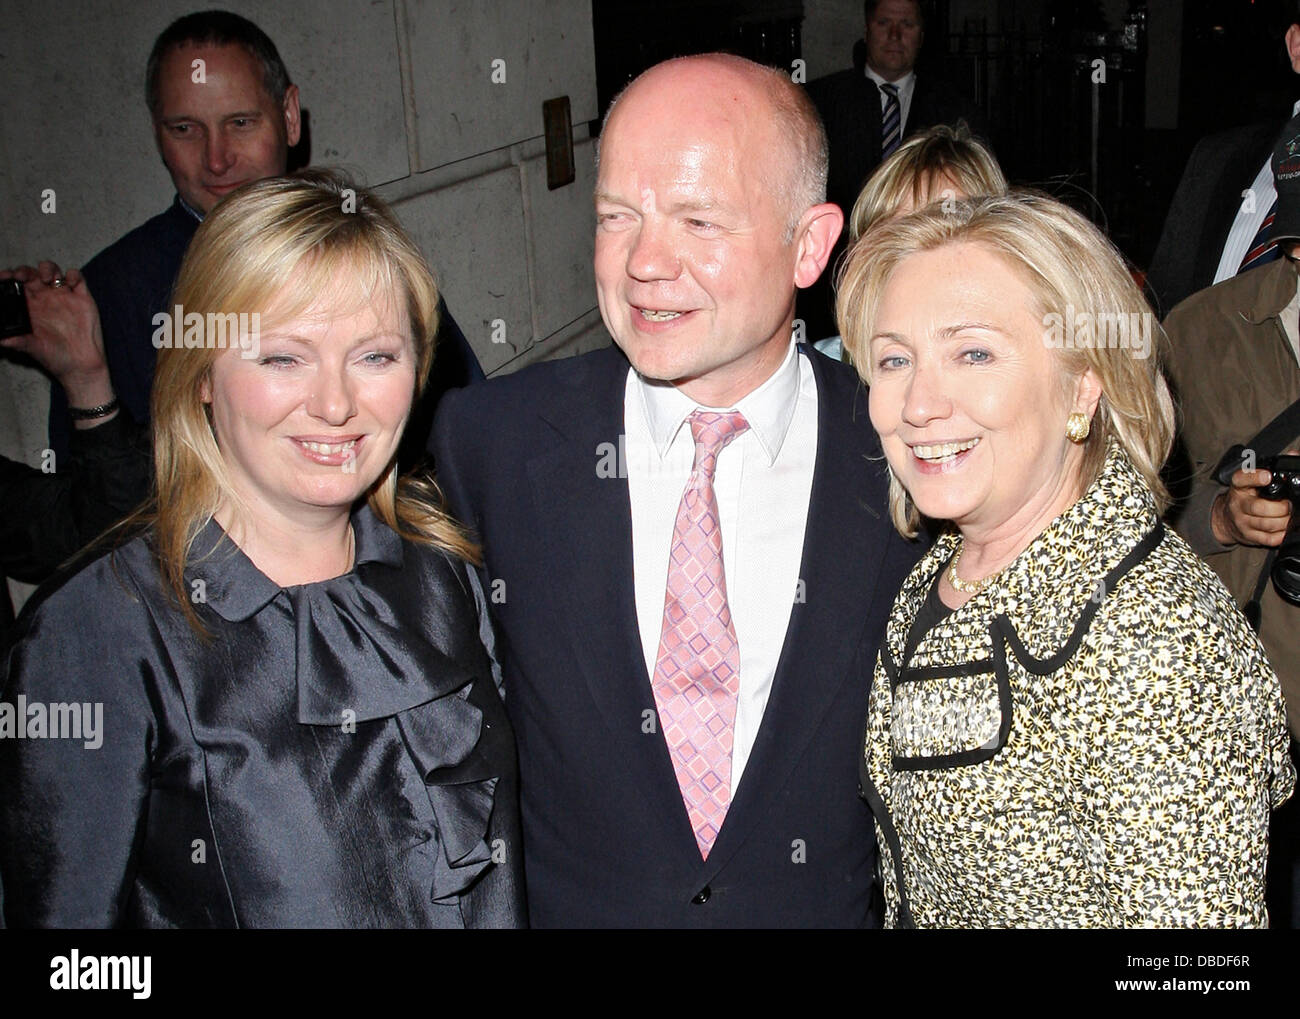 US Secretary of State Hillary Clinton leaves the Wolseley restaurant after dining with Foreign Secretary William Hague and his wife Ffion Hague London, England - 24.05.11 Stock Photo